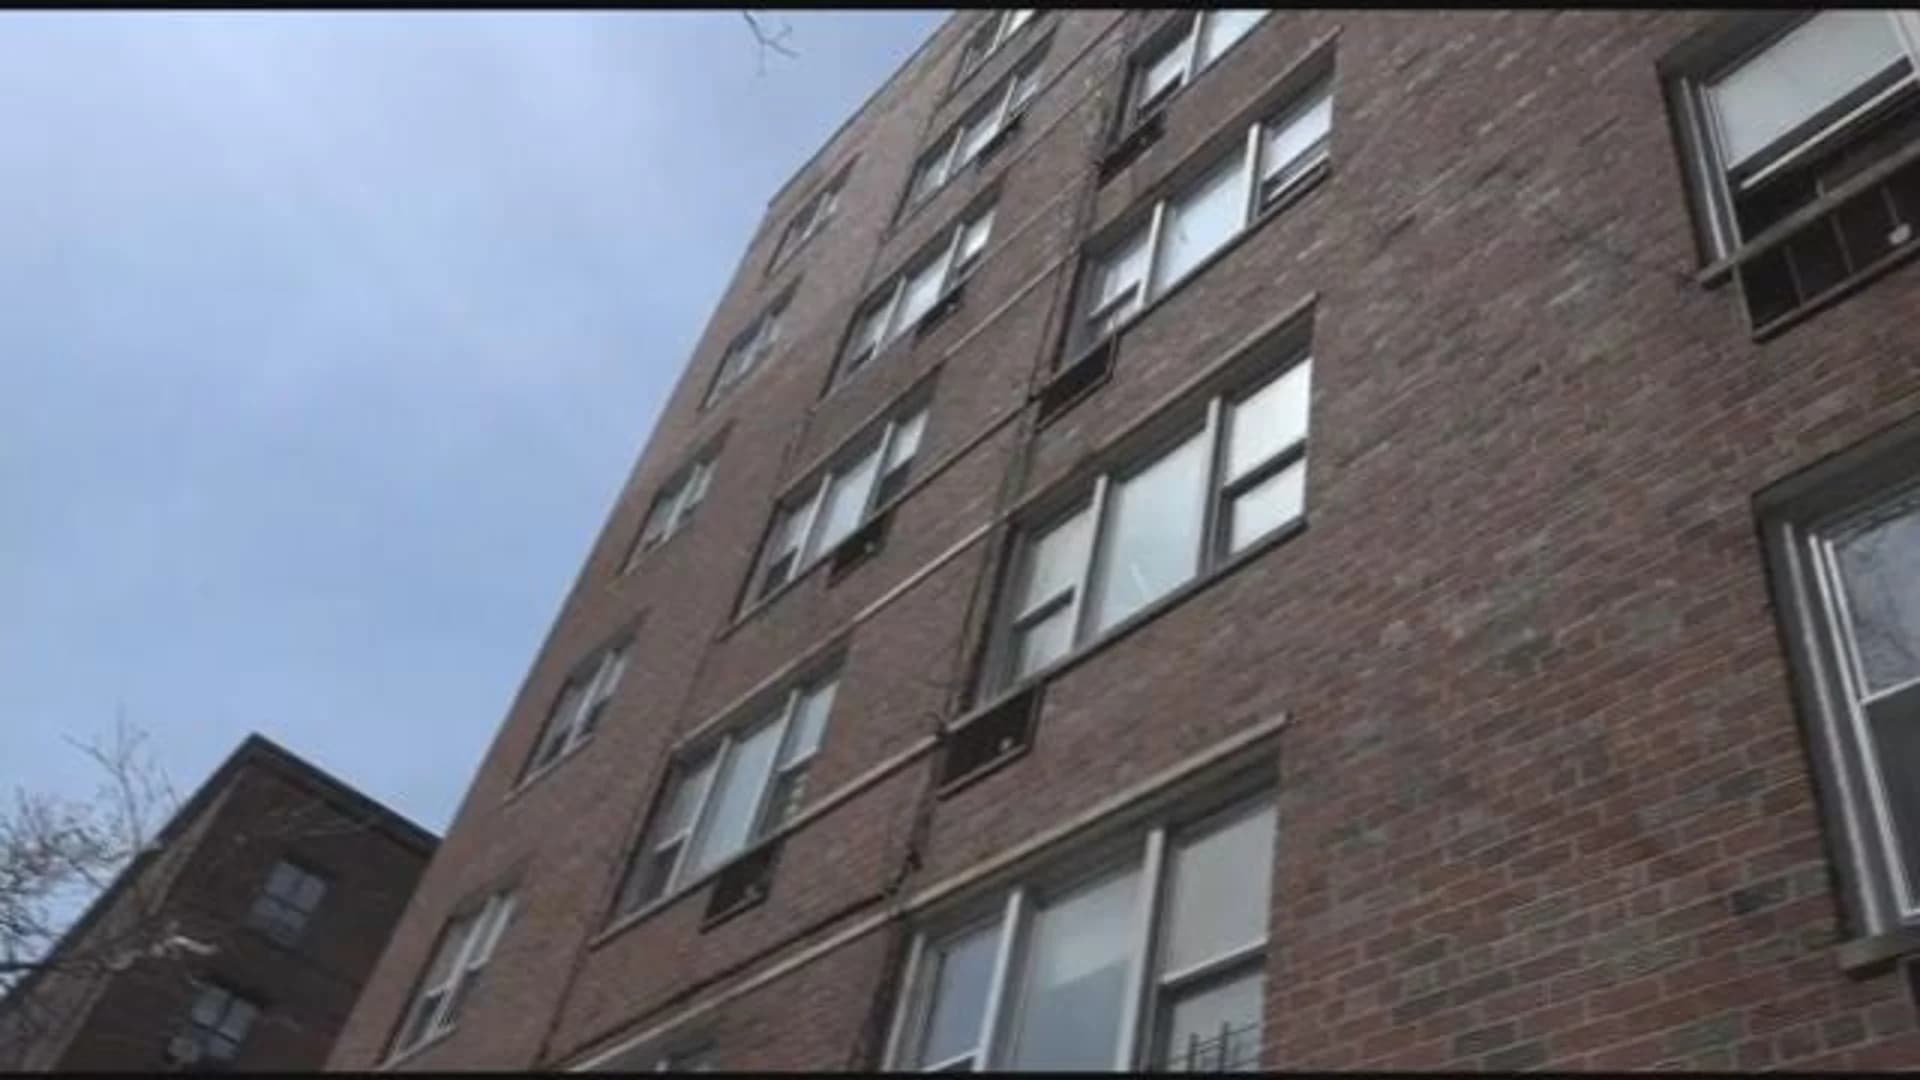 Elevator repairs on hold at Fordham building